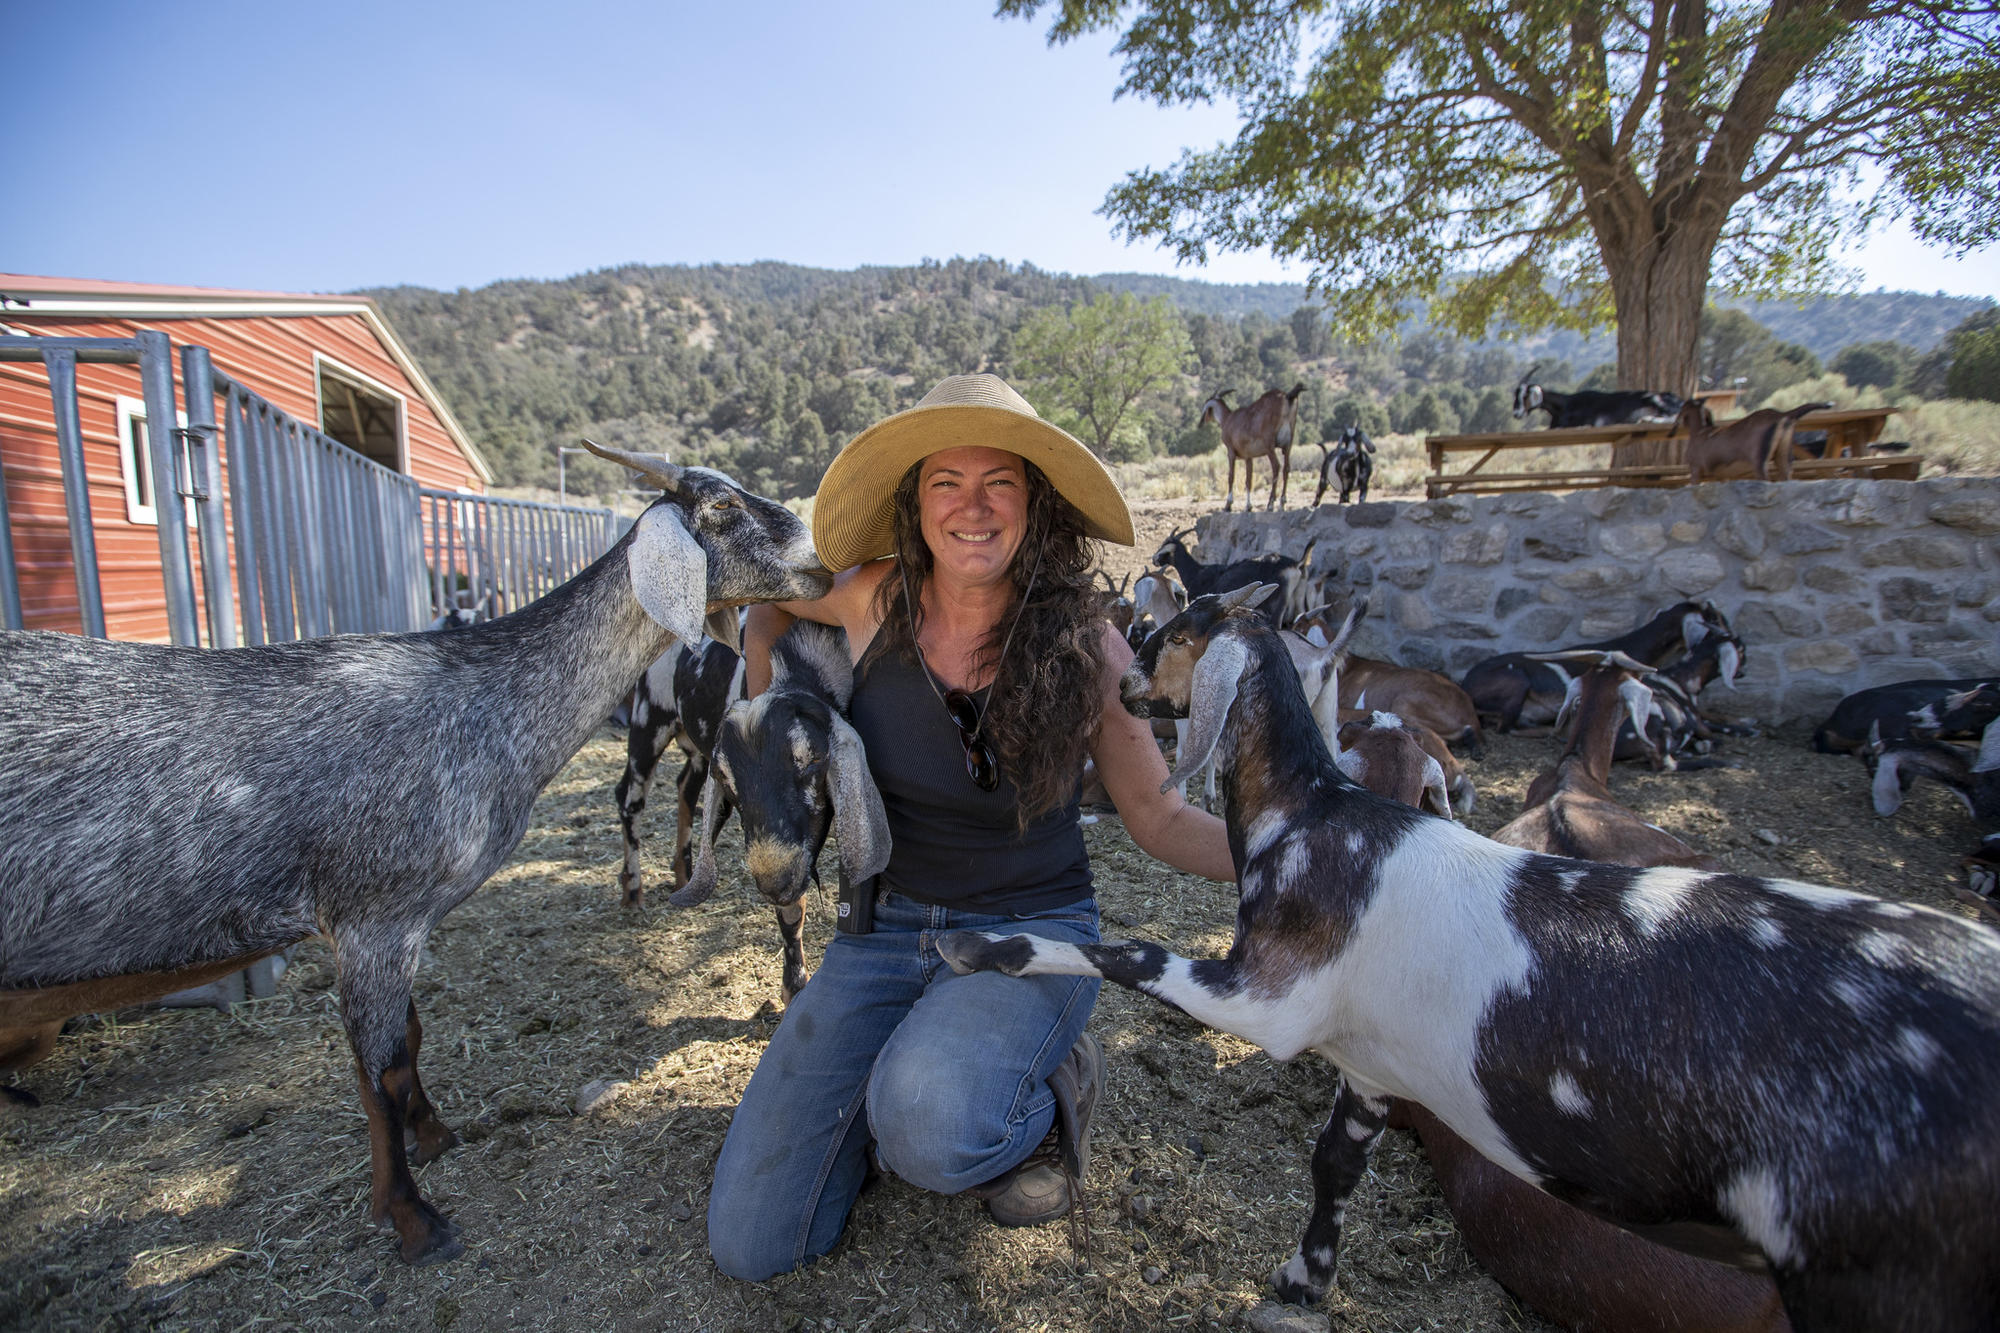 A physicist-turned-farmer left L.A. for a mountain getaway. You can visit for goat cheese and ...